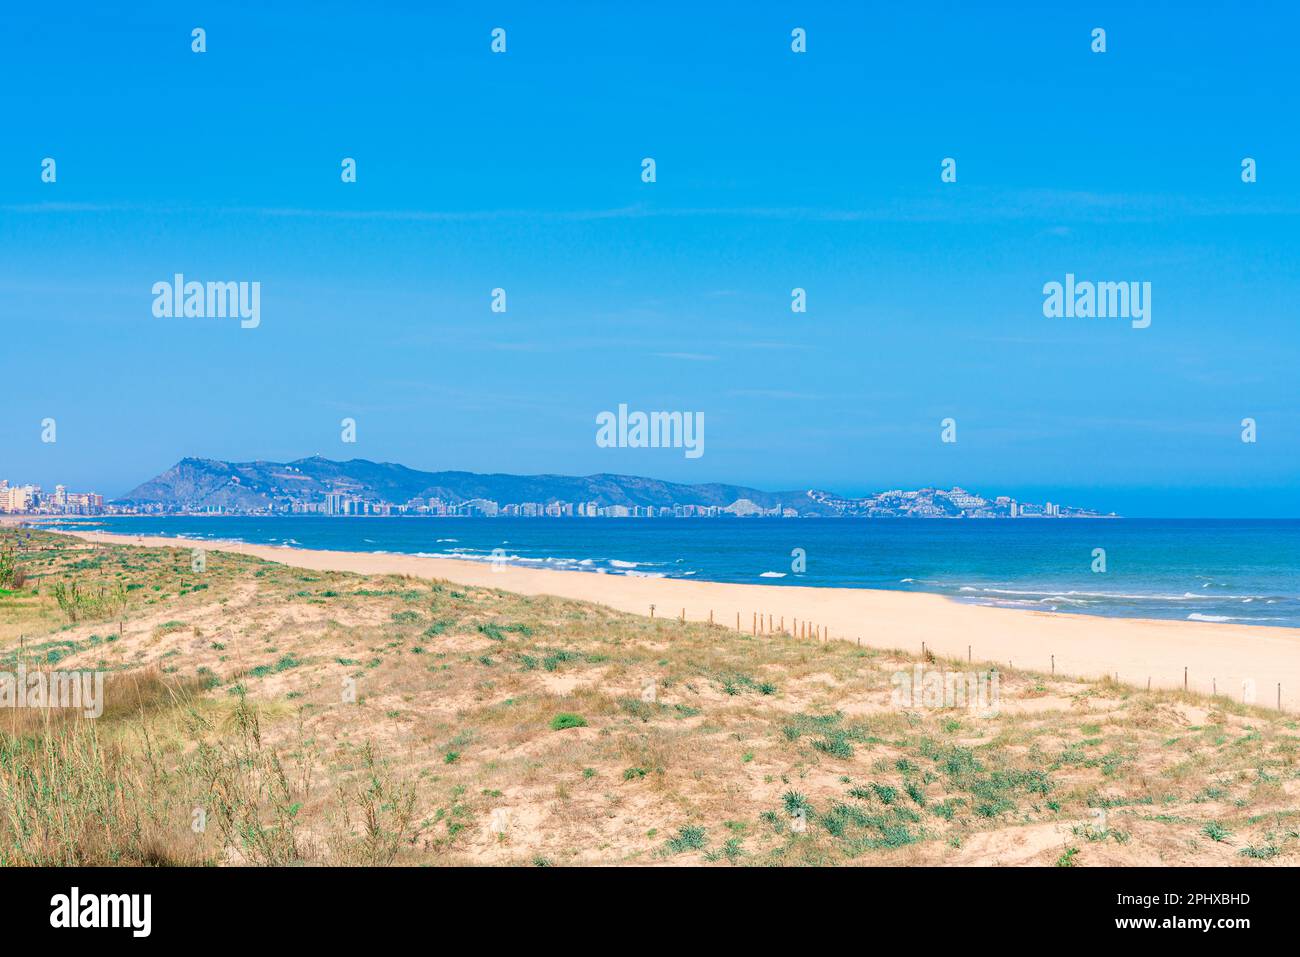 A beach with a view of the city of Cullera in the distance Stock Photo